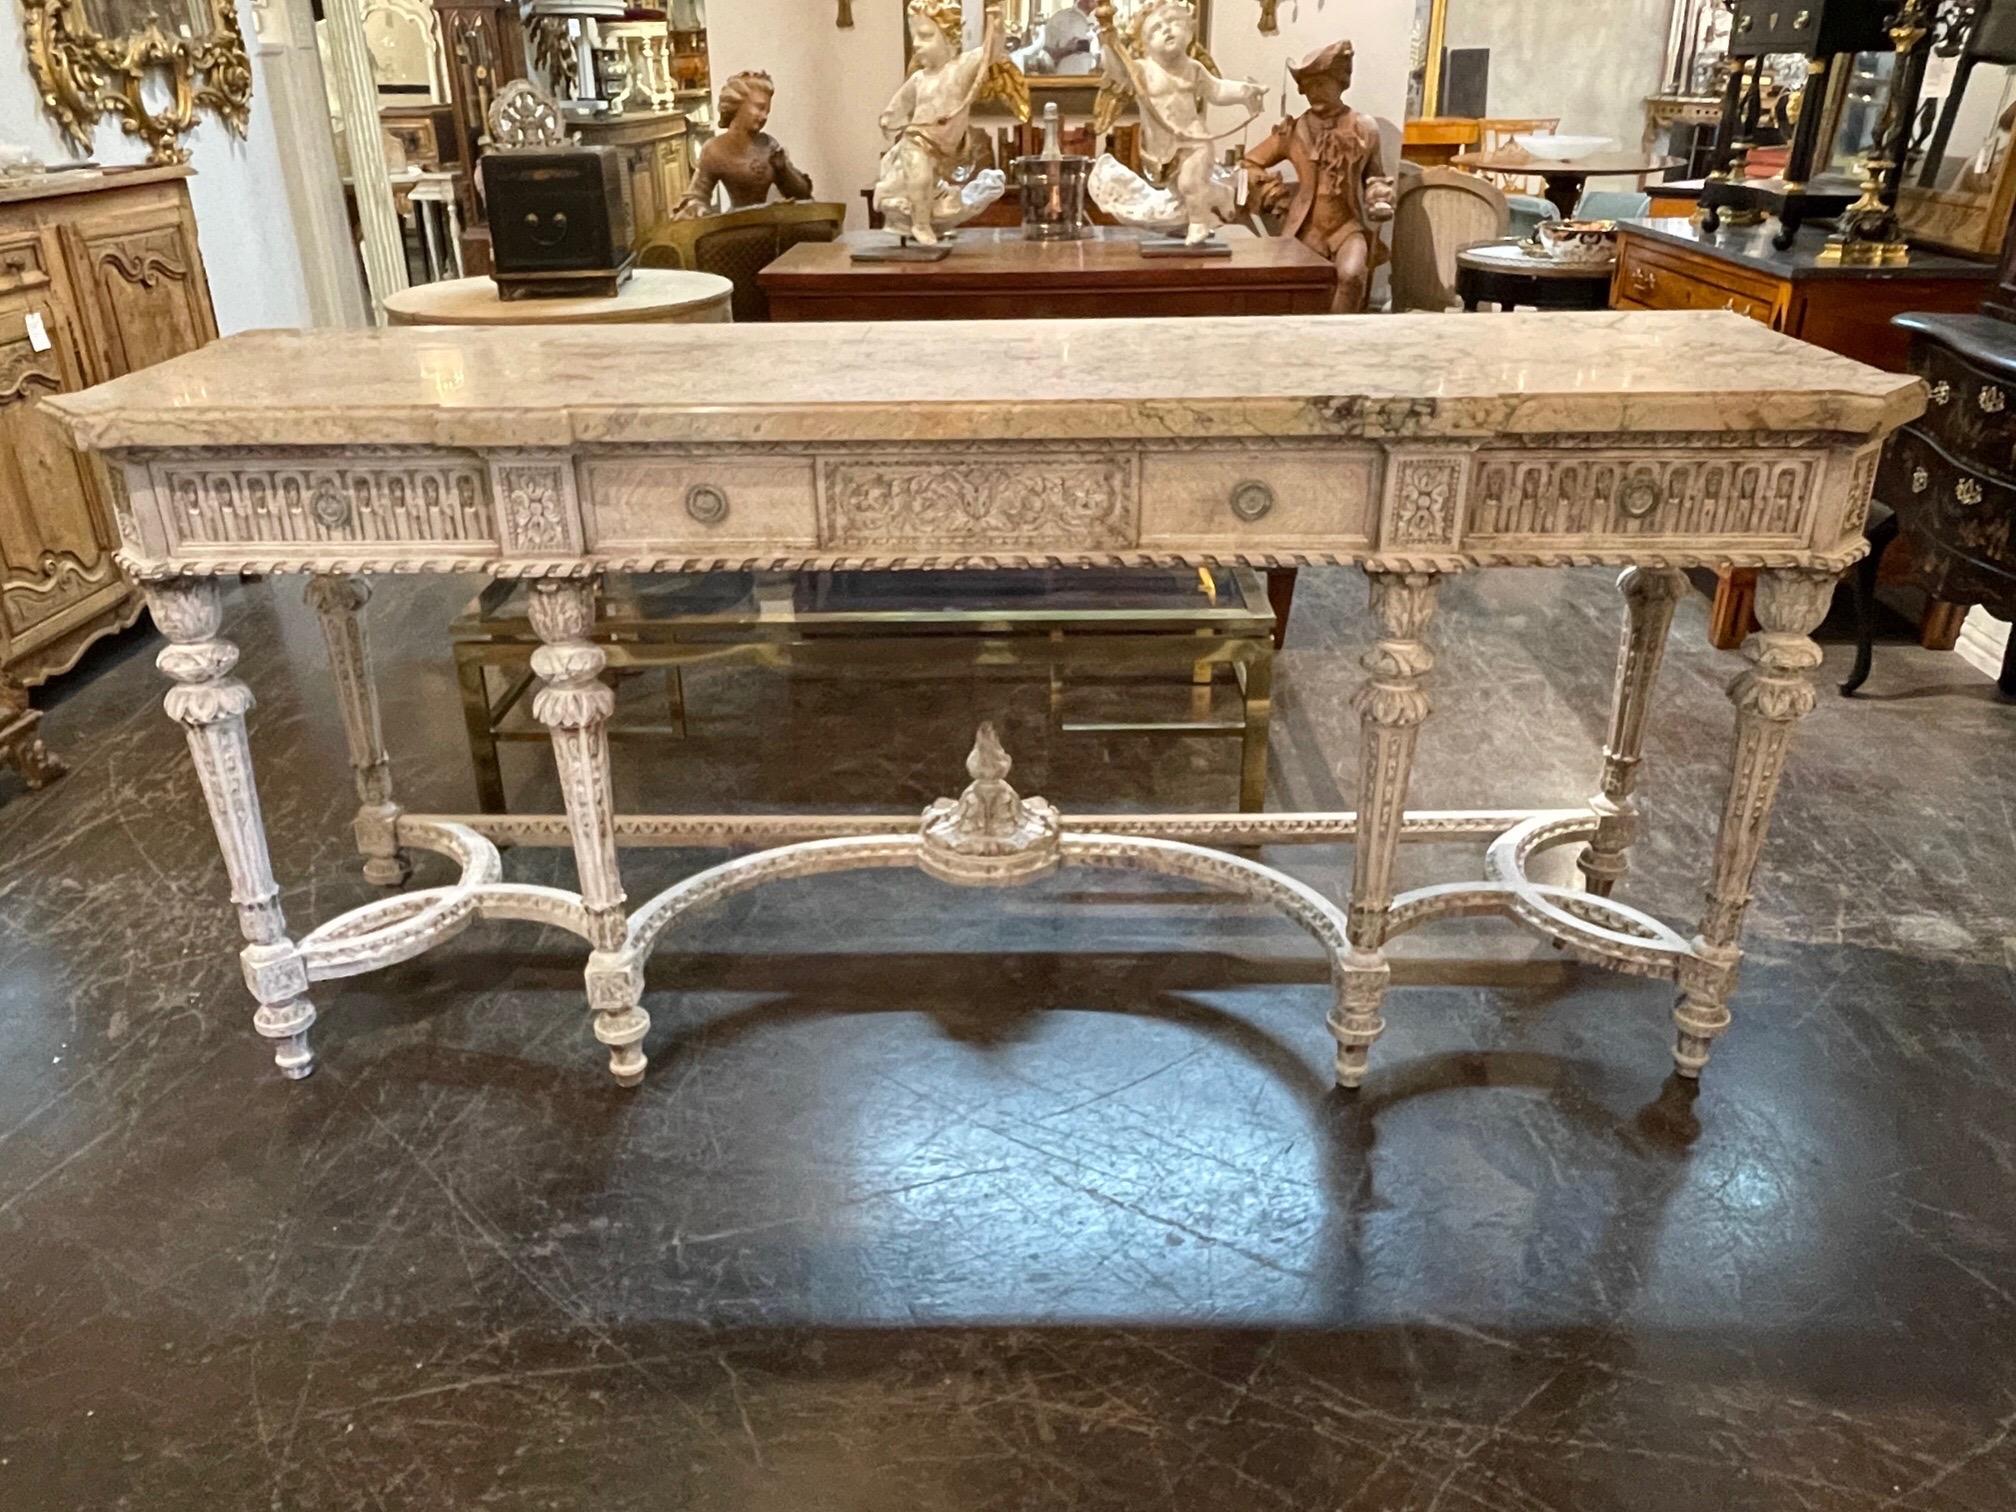 Superb antique French Louis XVI style carved and painted console table. This piece is expertly carved and has a beautiful white washed patina. Lovely marble top as well. Gorgeous!!